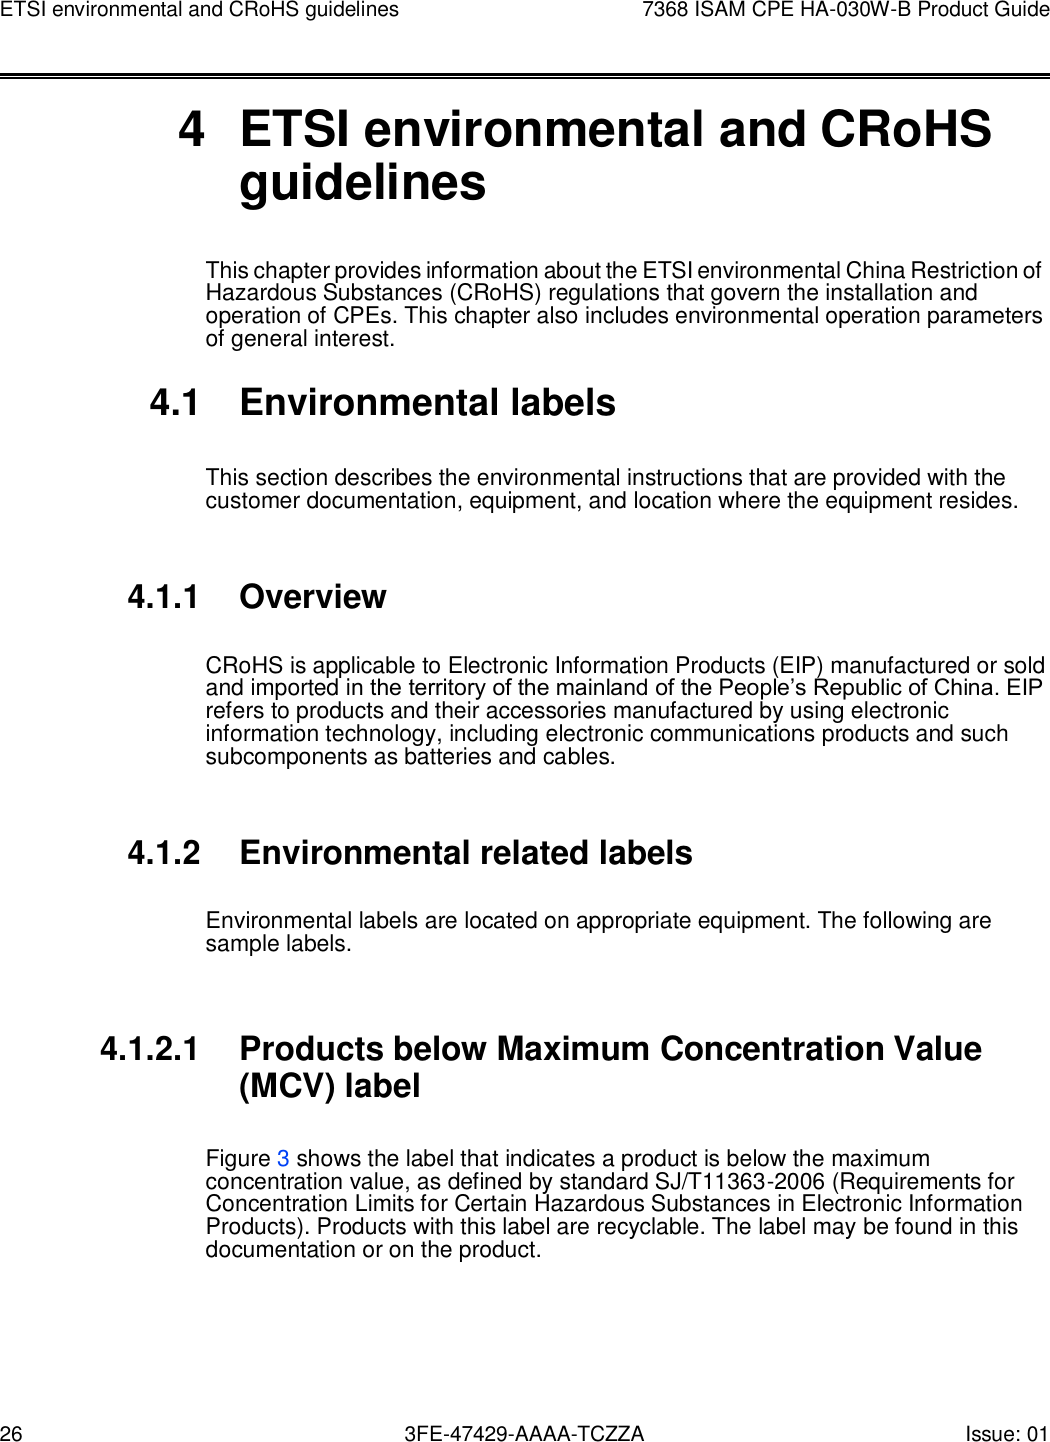 26 3FE-47429-AAAA-TCZZA Issue: 01 ETSI environmental and CRoHS guidelines 7368 ISAM CPE HA-030W-B Product Guide       4  ETSI environmental and CRoHS guidelines This chapter provides information about the ETSI environmental China Restriction of Hazardous Substances (CRoHS) regulations that govern the installation and operation of CPEs. This chapter also includes environmental operation parameters of general interest.  4.1  Environmental labels  This section describes the environmental instructions that are provided with the customer documentation, equipment, and location where the equipment resides.   4.1.1 Overview  CRoHS is applicable to Electronic Information Products (EIP) manufactured or sold and imported in the territory of the mainland of the People’s Republic of China. EIP refers to products and their accessories manufactured by using electronic information technology, including electronic communications products and such subcomponents as batteries and cables.   4.1.2 Environmental related labels  Environmental labels are located on appropriate equipment. The following are sample labels.   4.1.2.1 Products below Maximum Concentration Value (MCV) label  Figure 3 shows the label that indicates a product is below the maximum concentration value, as defined by standard SJ/T11363-2006 (Requirements for Concentration Limits for Certain Hazardous Substances in Electronic Information Products). Products with this label are recyclable. The label may be found in this documentation or on the product. 